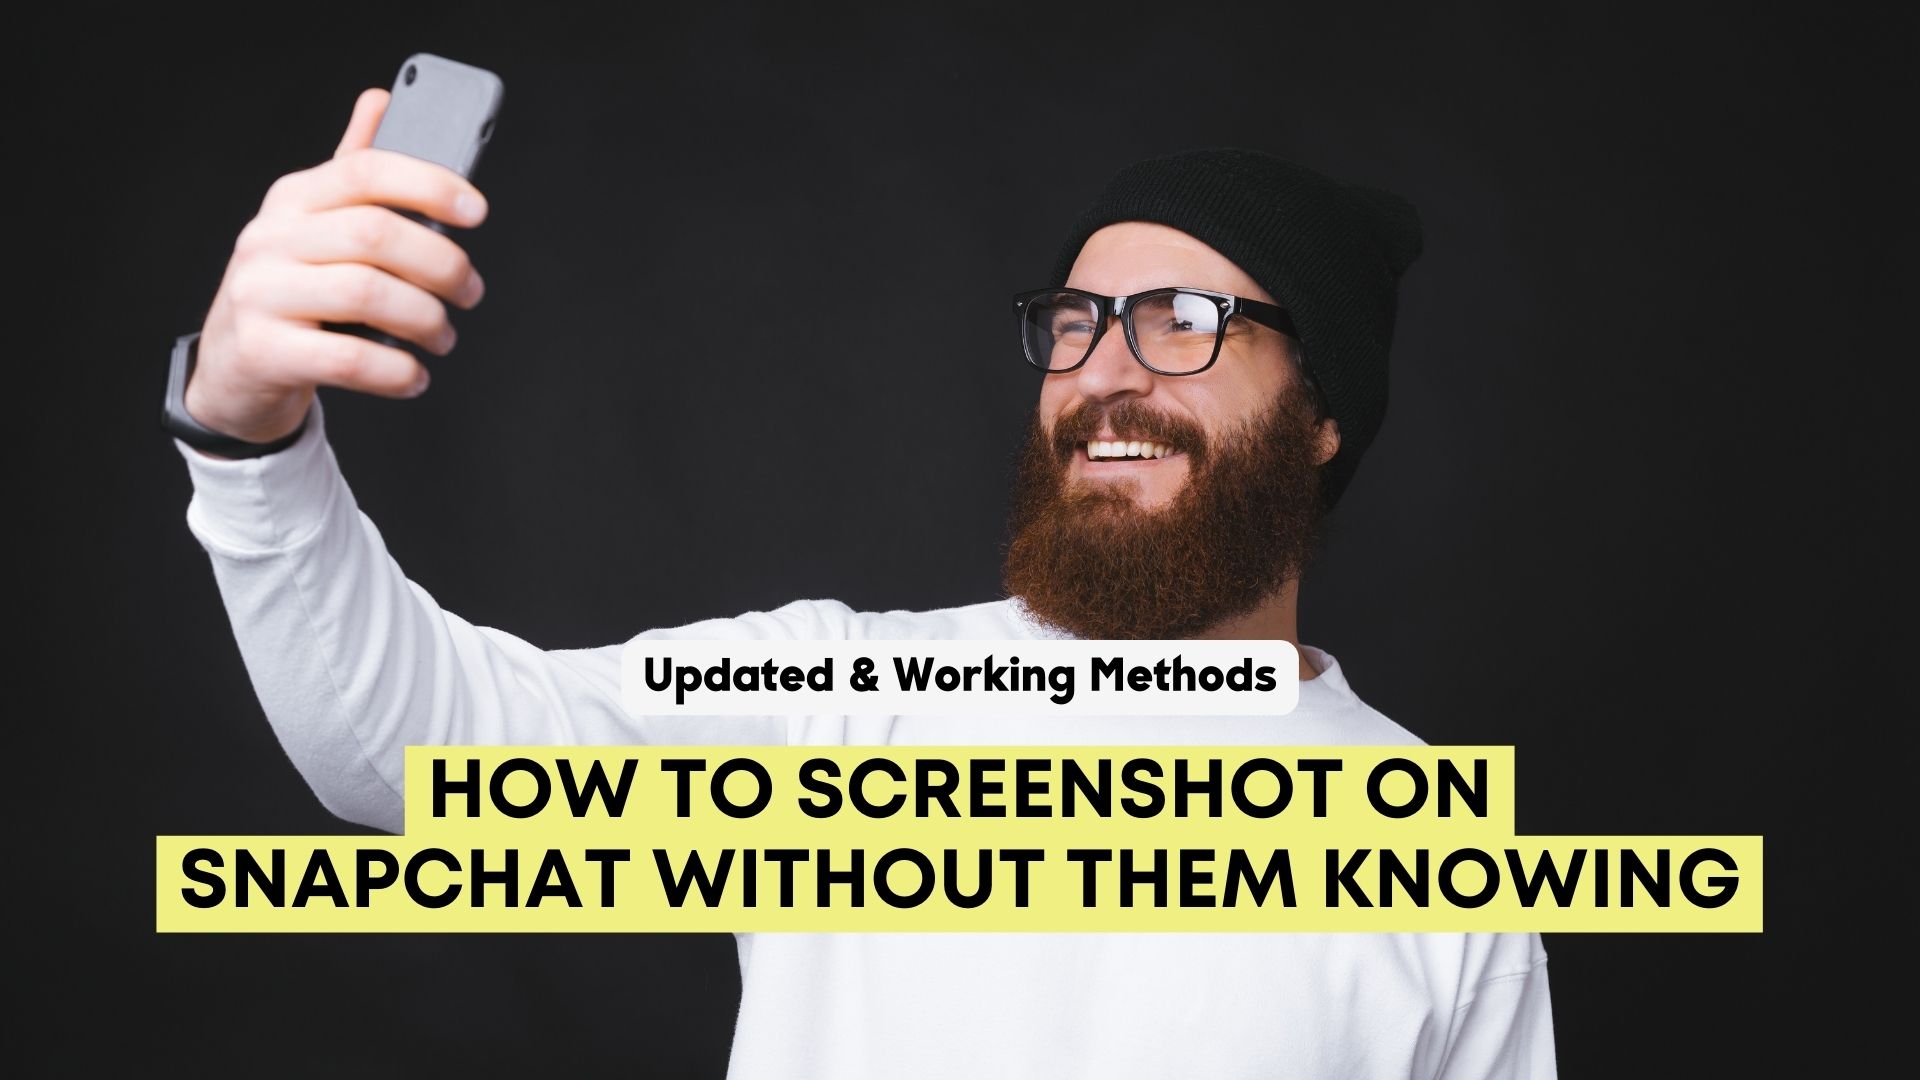 How to Screenshot on Snapchat Without Them Knowing [Updated Methods]